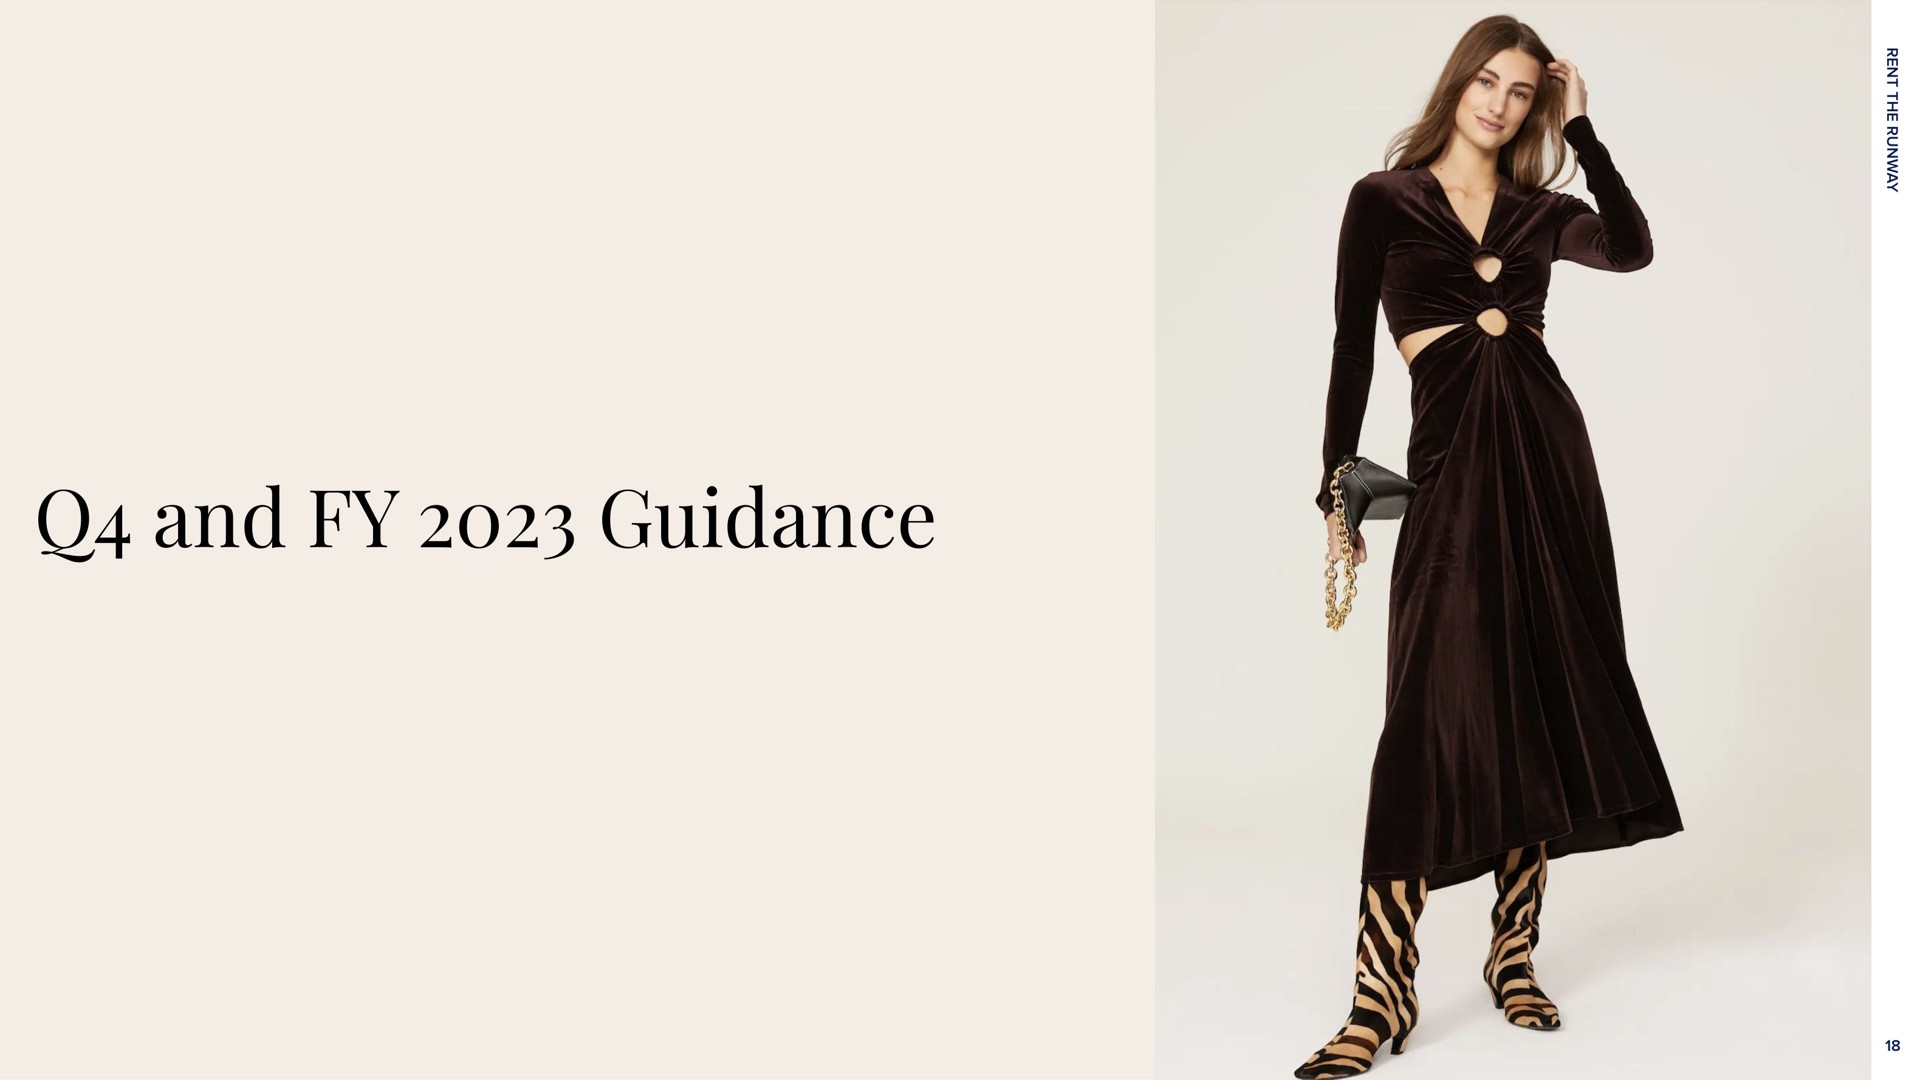 and guidance | Rent The Runway